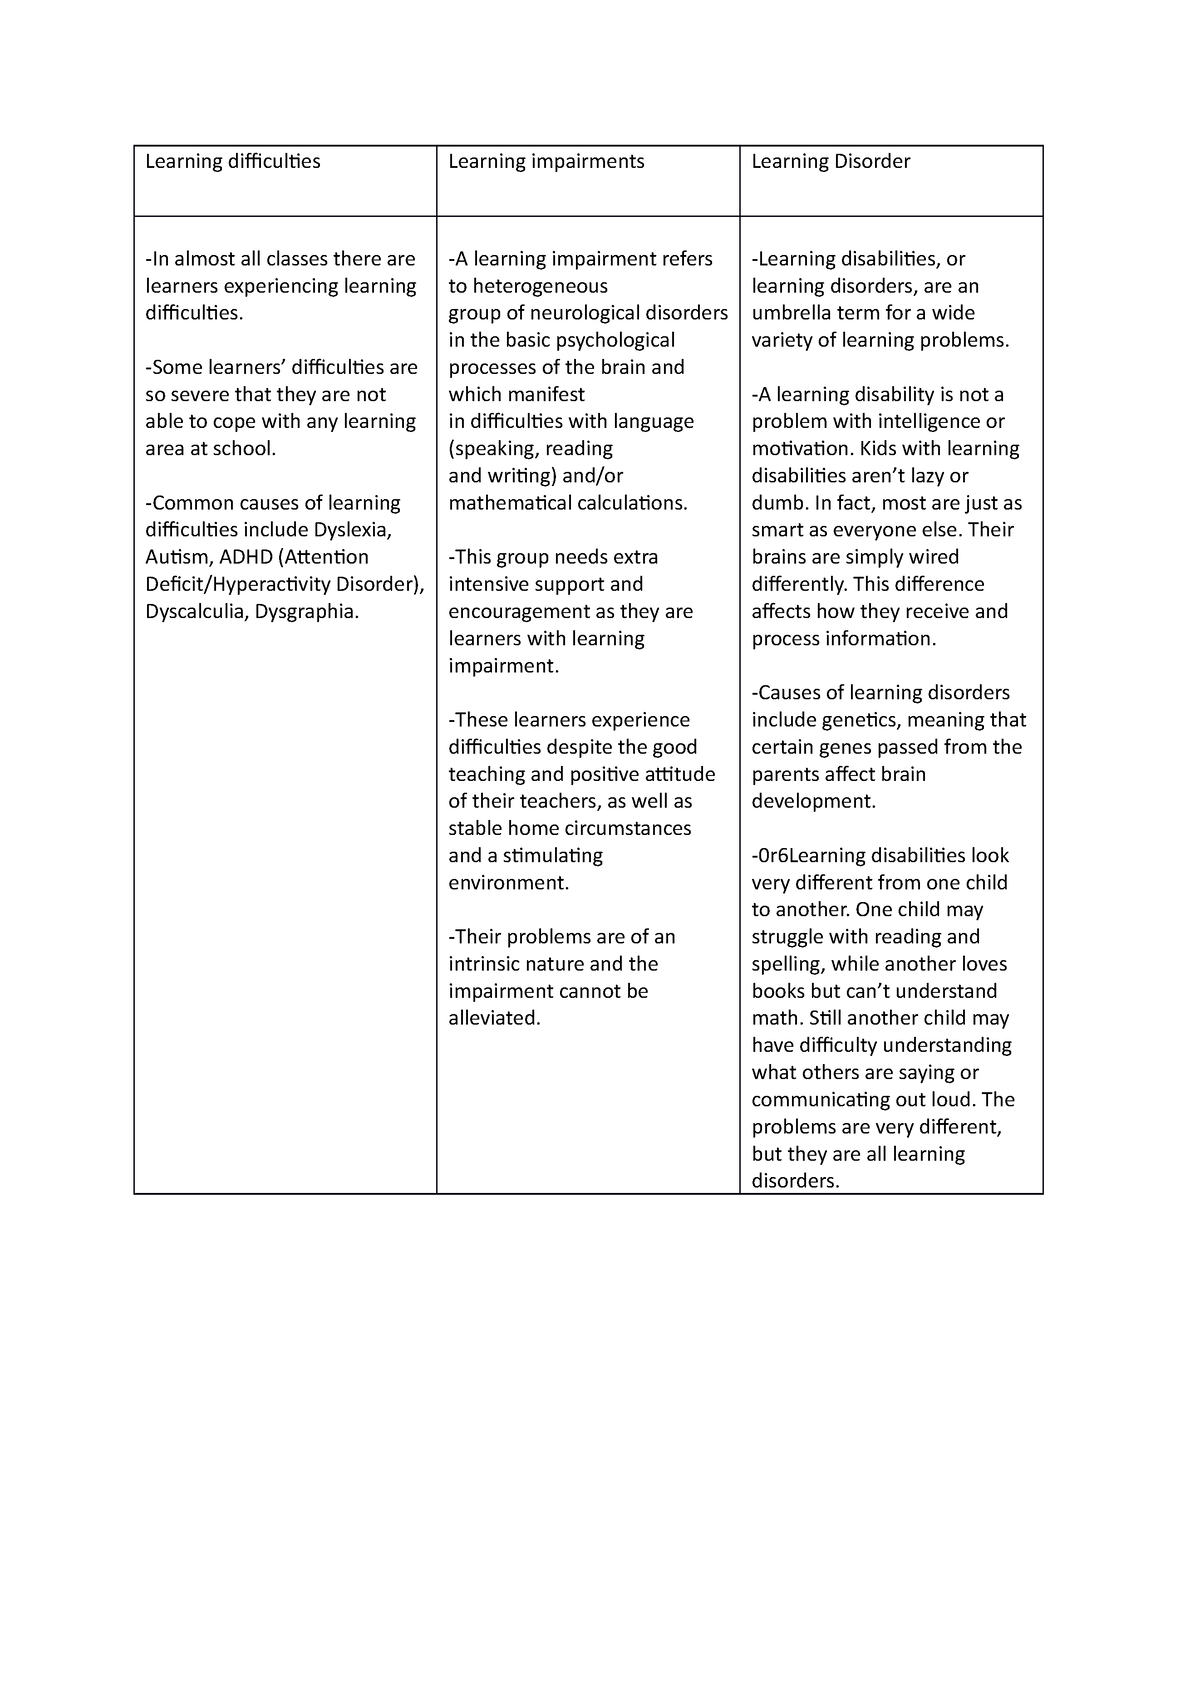 UNIT 5 TASK - Learning difficulties - Learning difficulties Learning ...